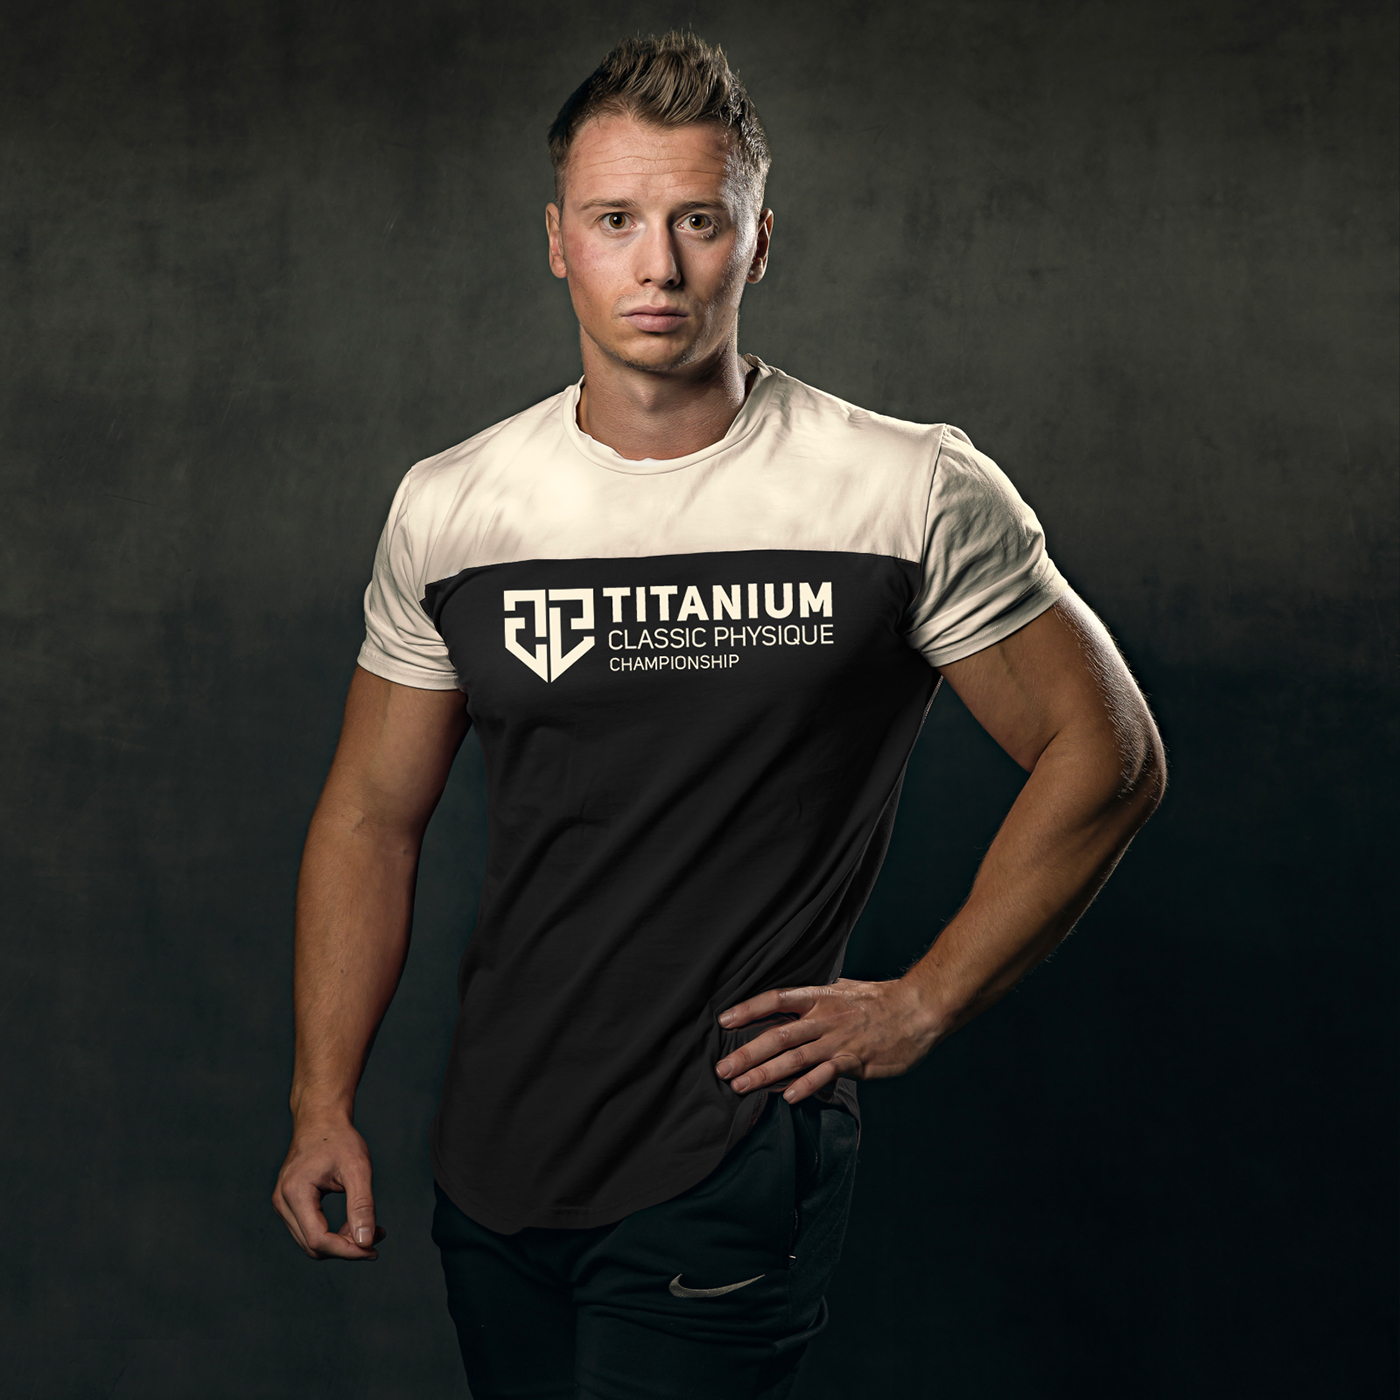 Titanium Classic Physique gym Championship muscle fitness brand identity